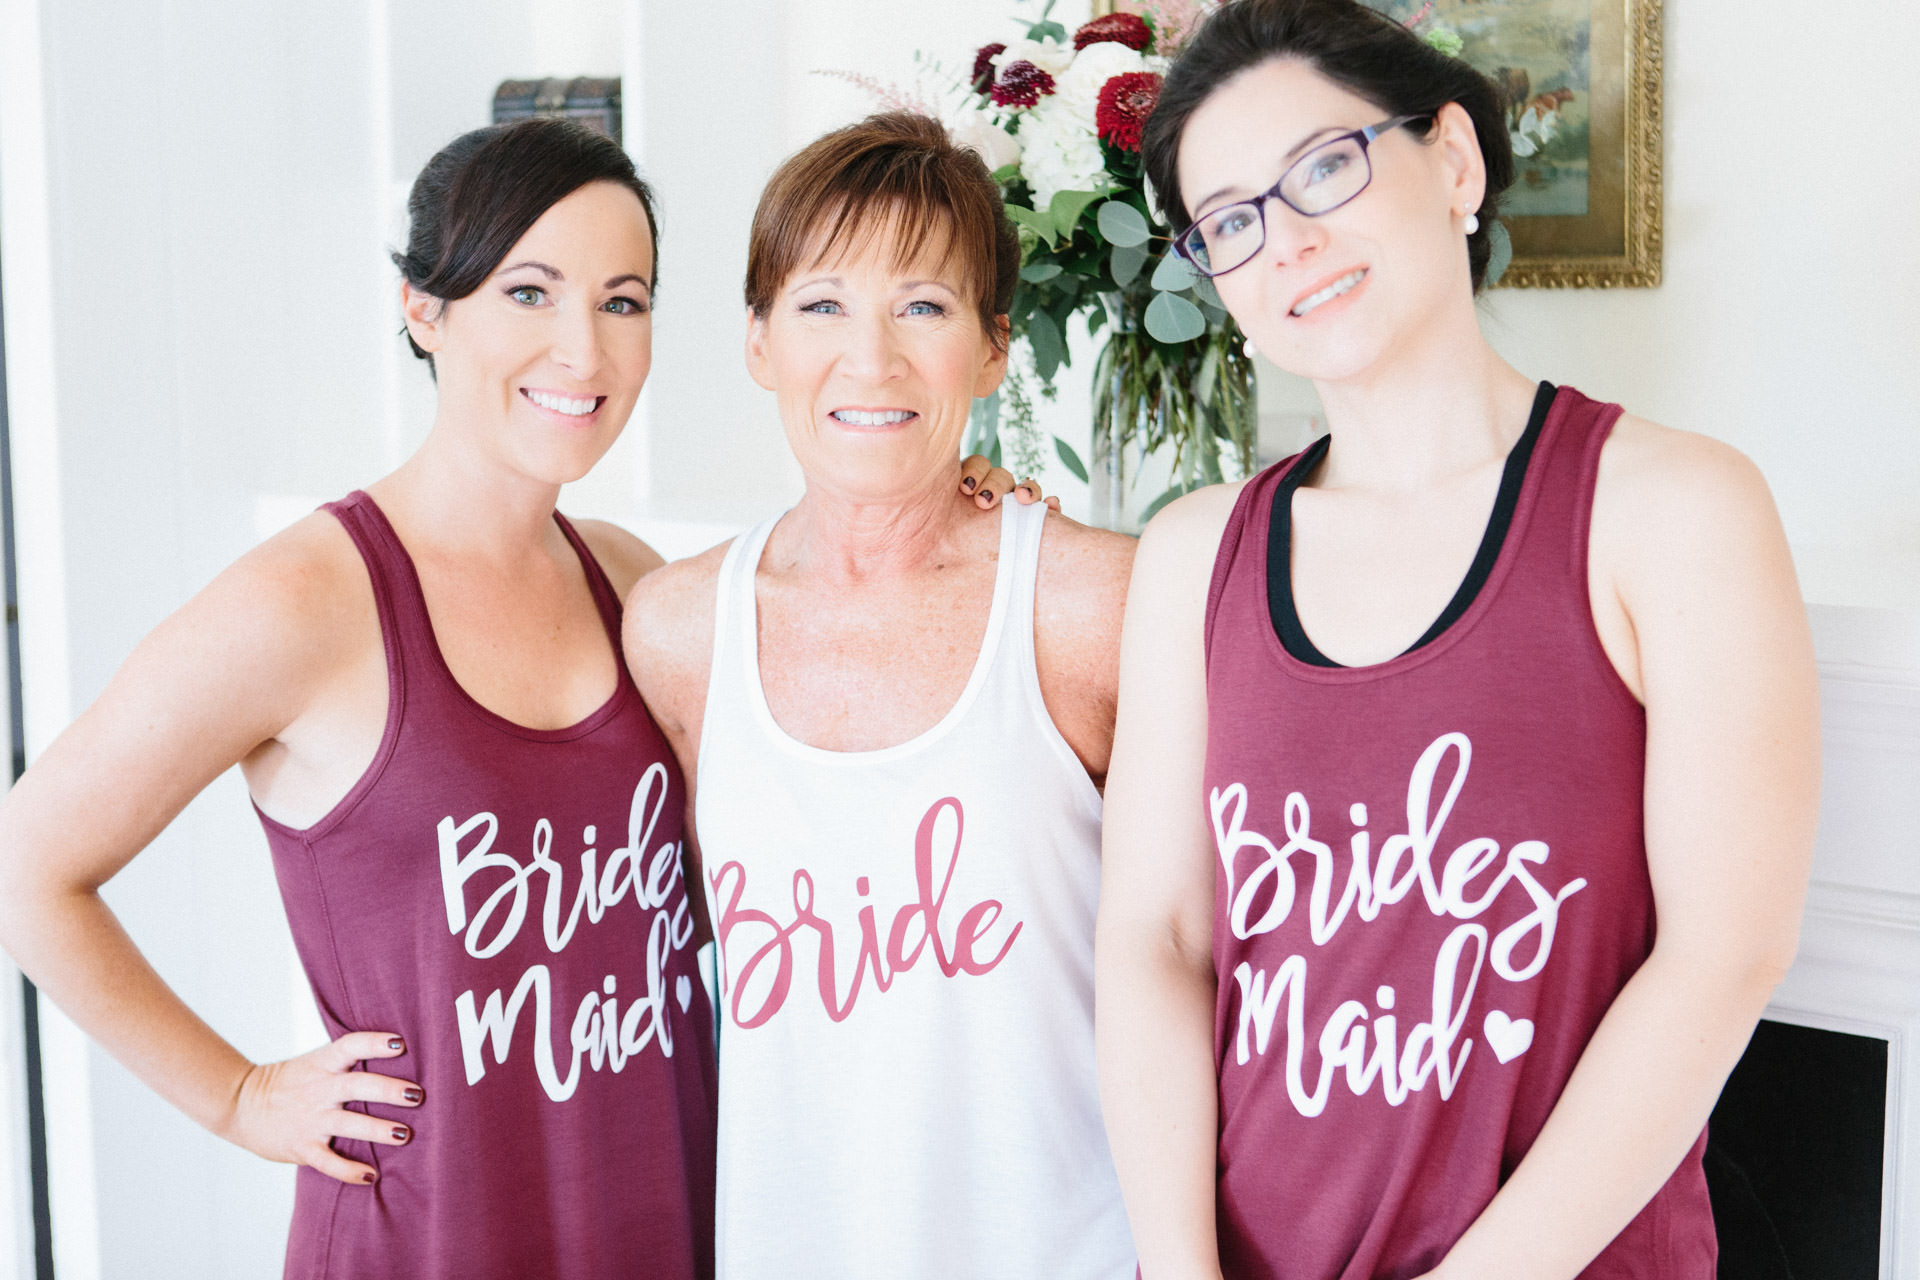 Bride and bridesmaids posing for a photograph